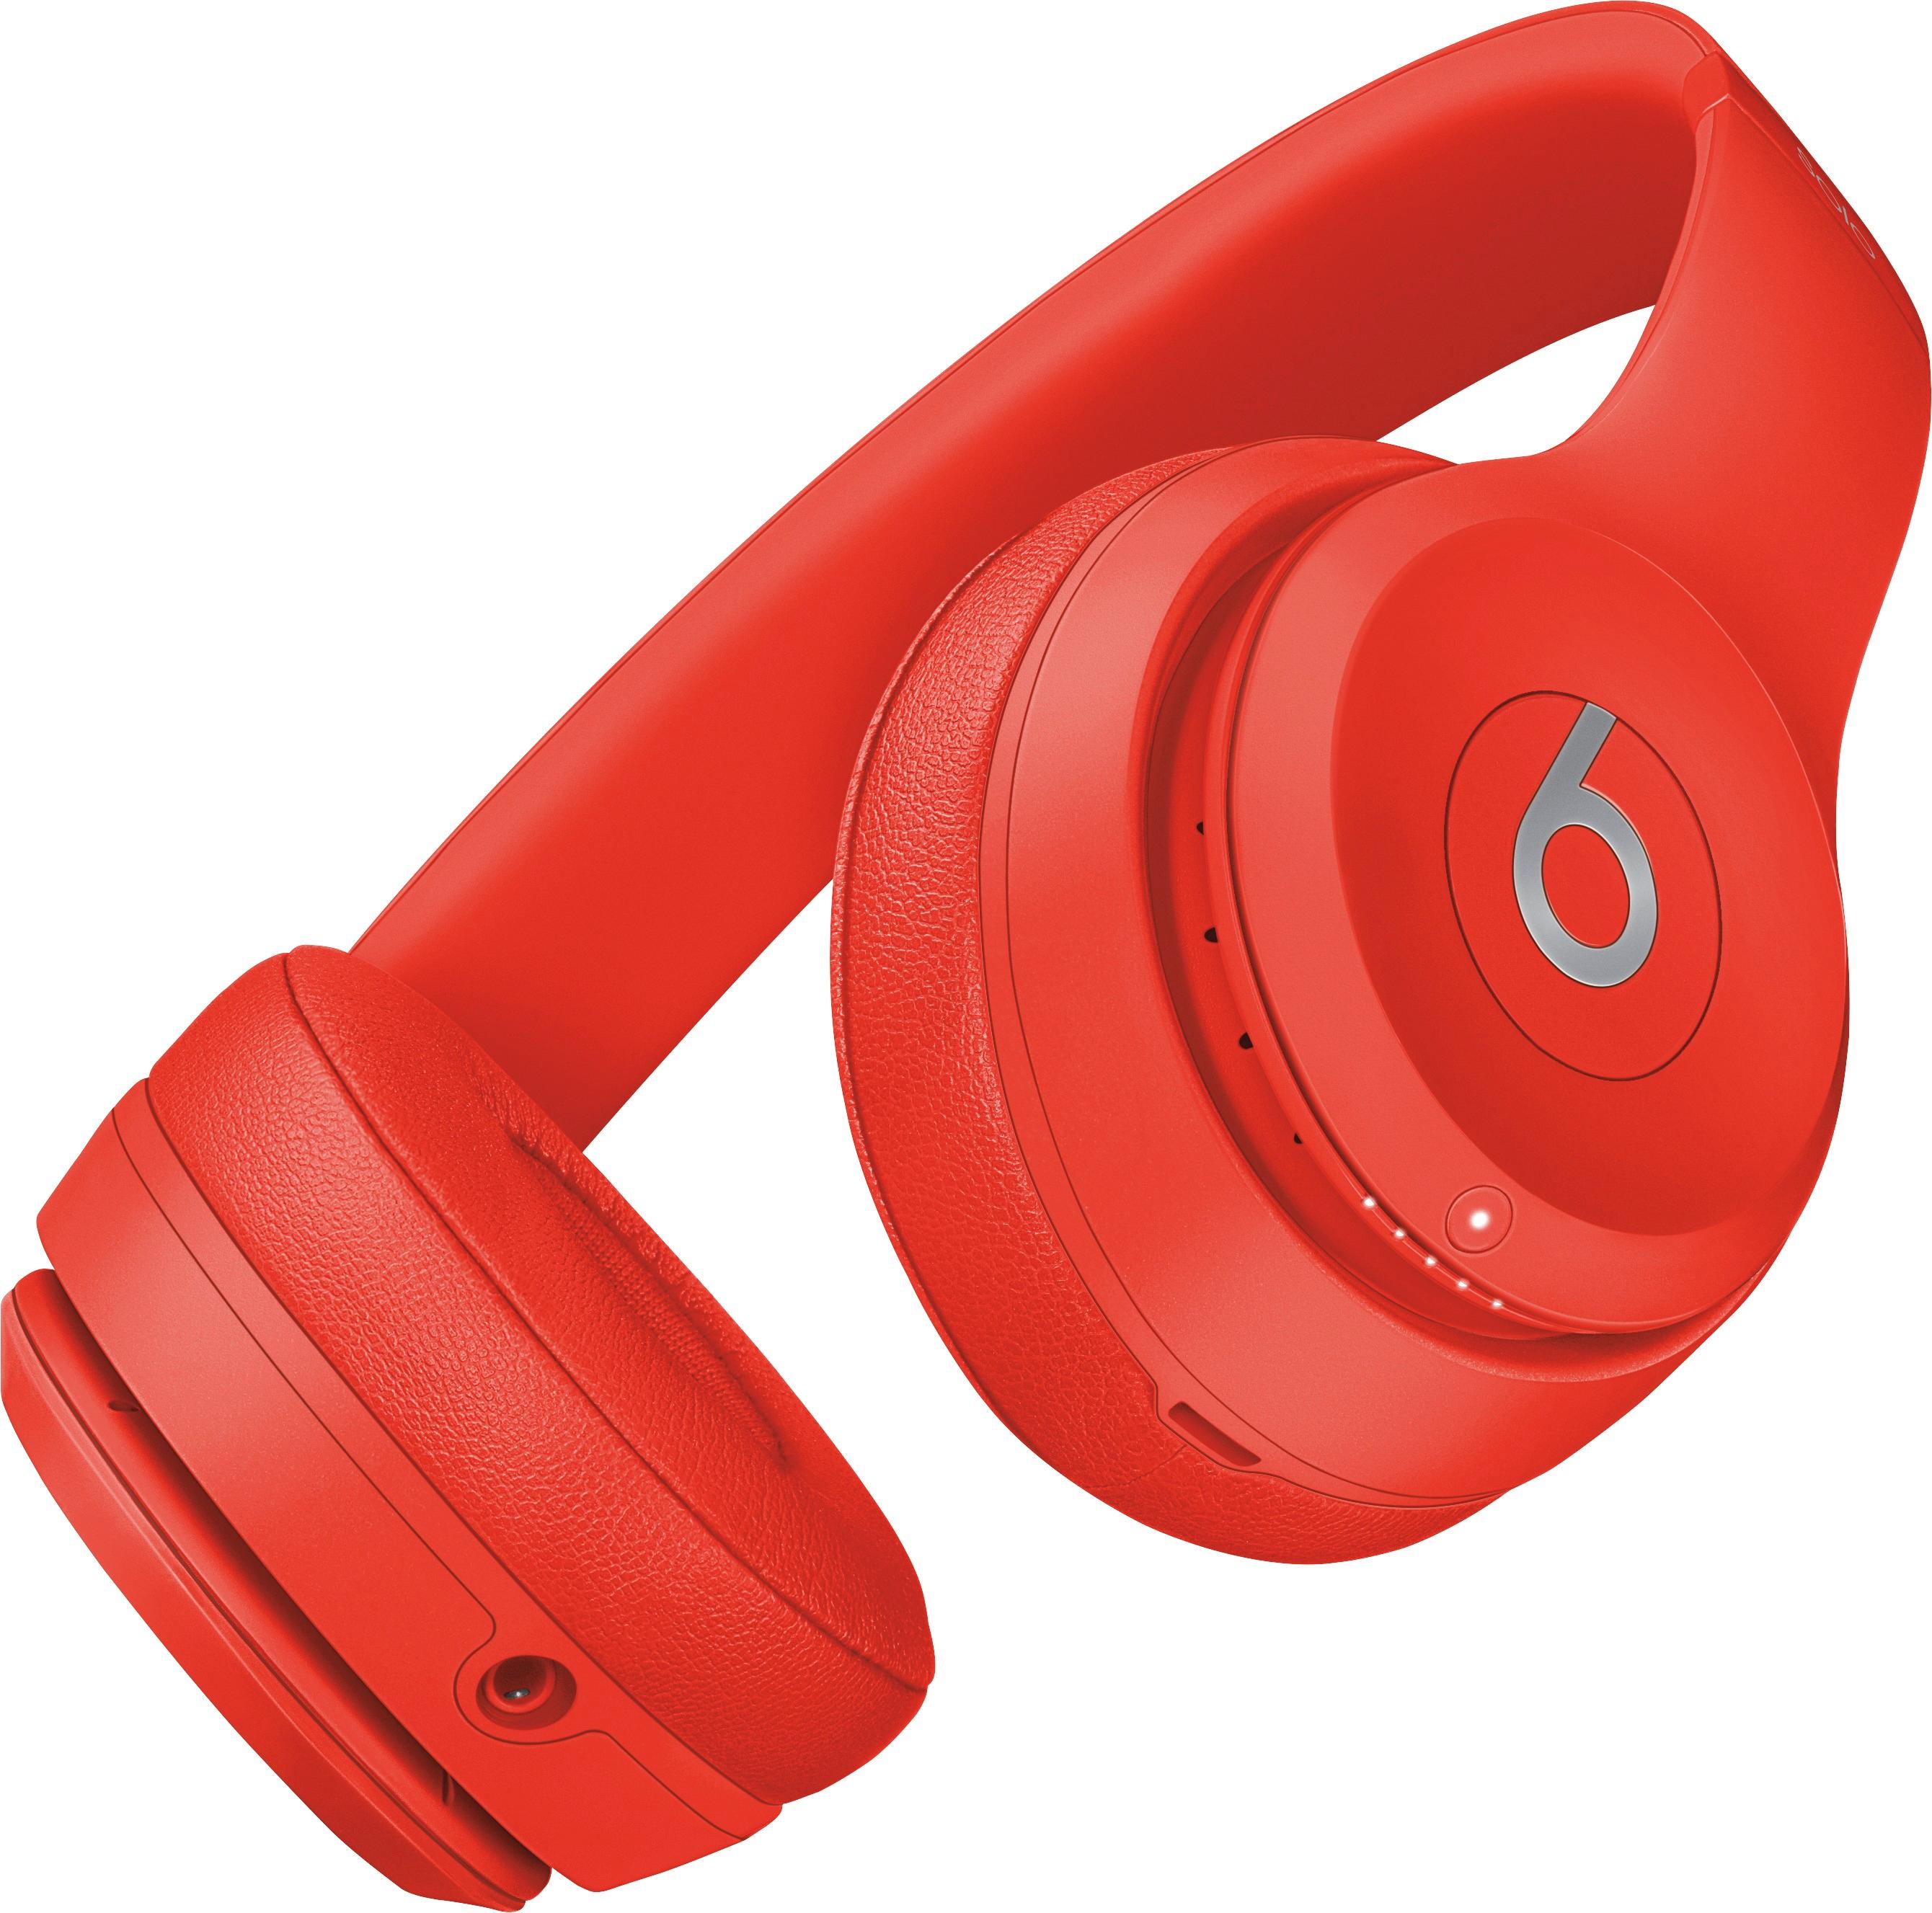 beats solo 3 special edition red